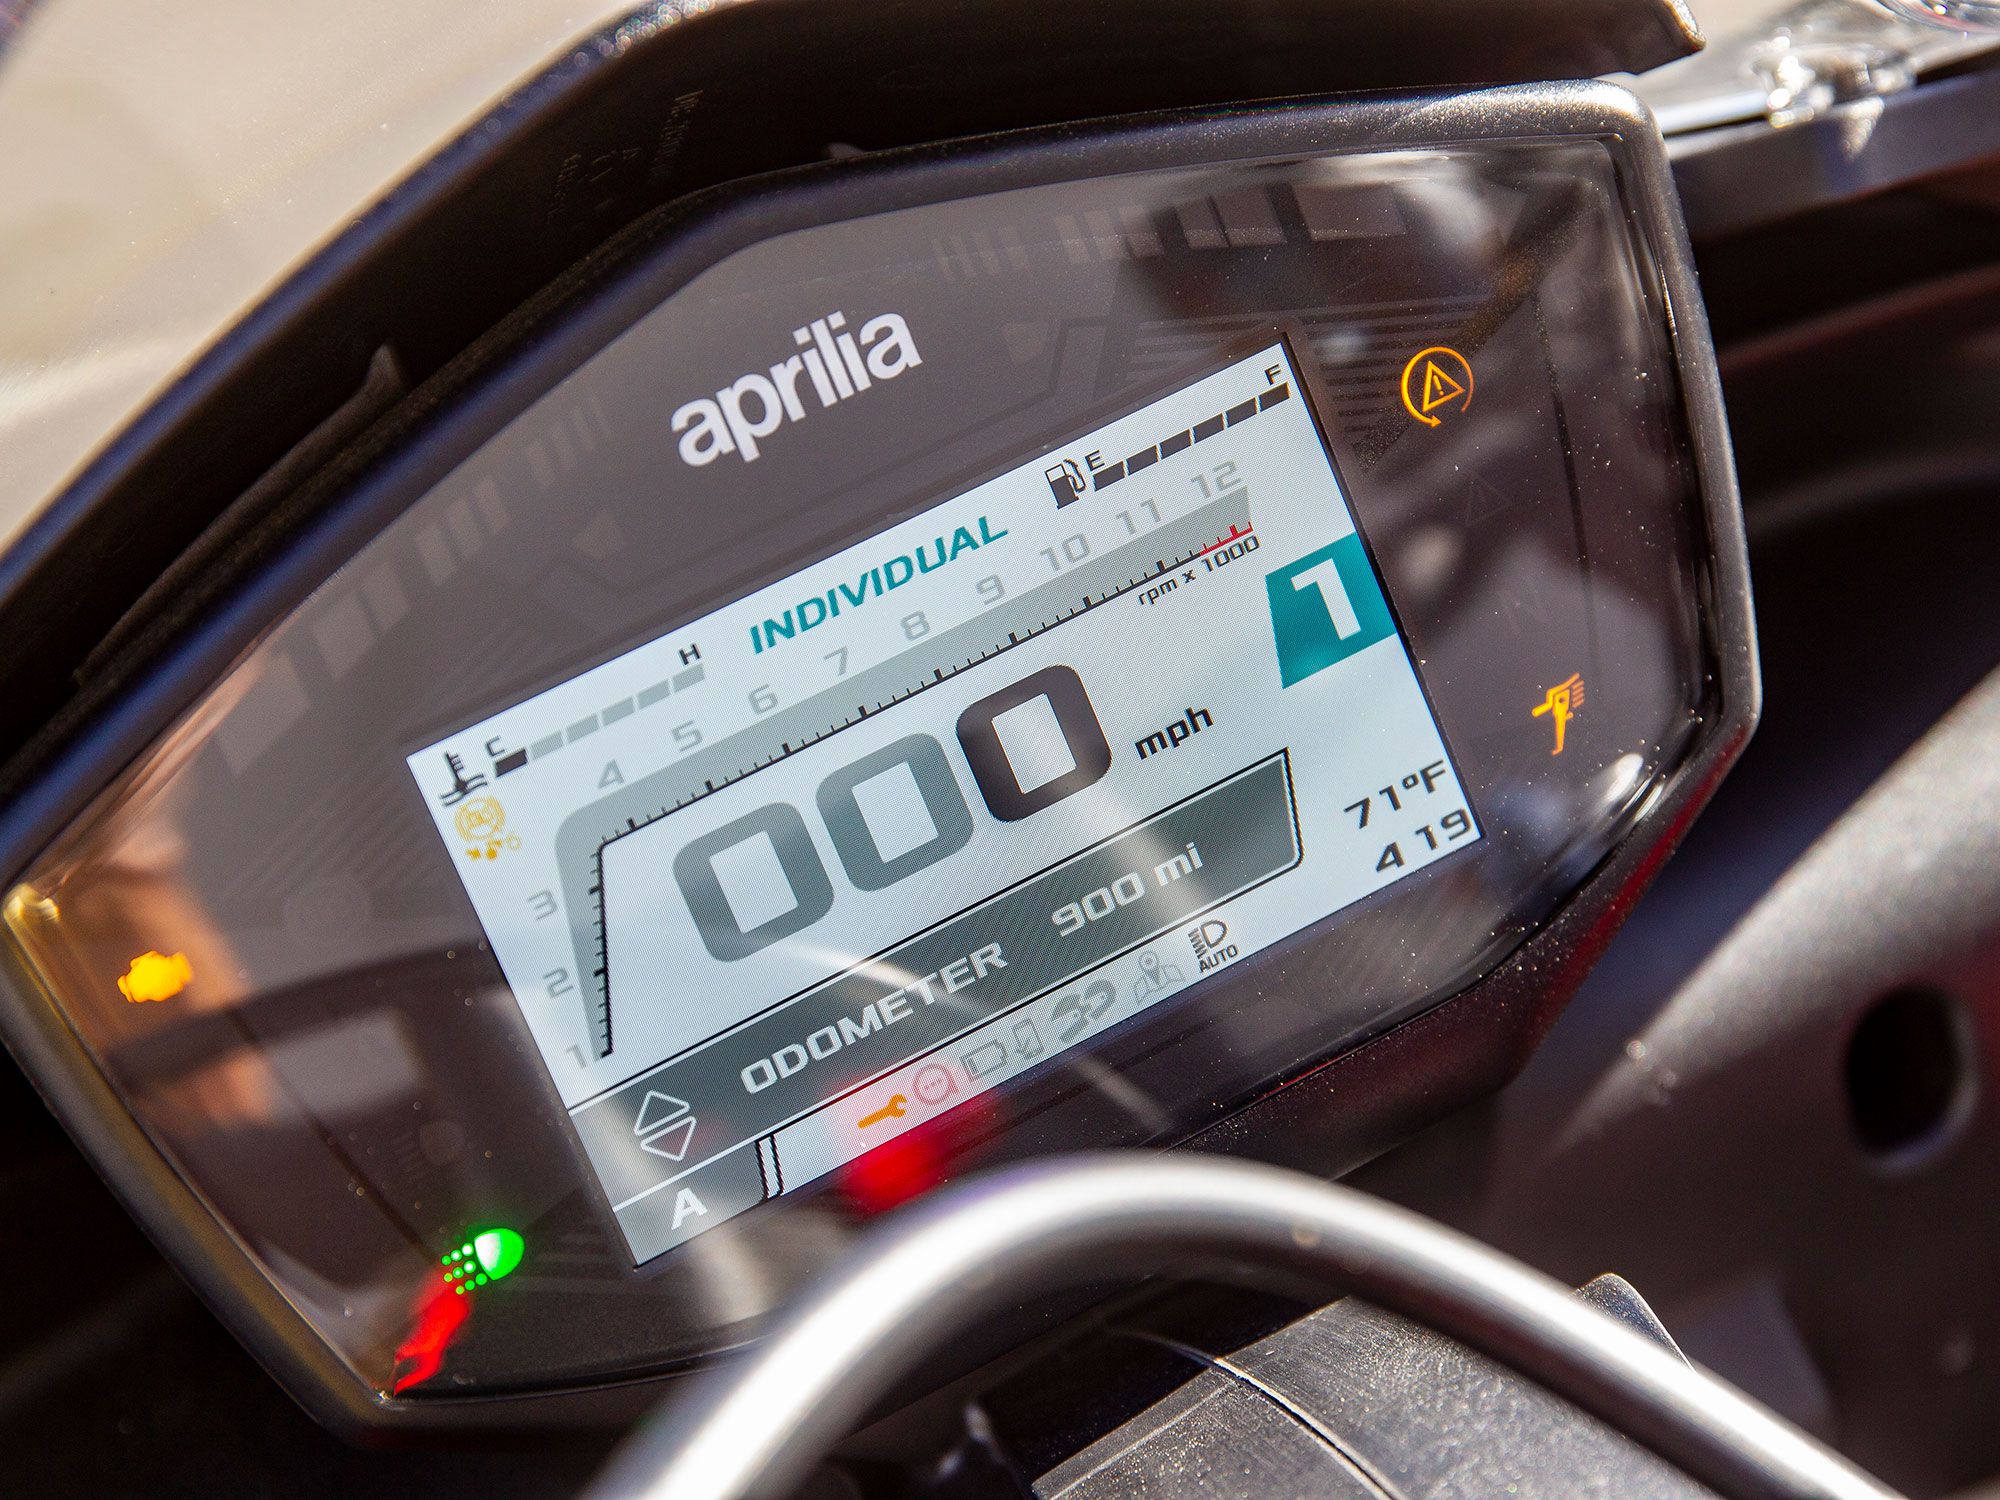 The TFT display equipped to the Tuono 660 offers vital riding information at a quick glance, while serving as an easy platform to tailor the Aprilia Performance Ride Control (APRC) electronic rider-aid suite to rider preference.